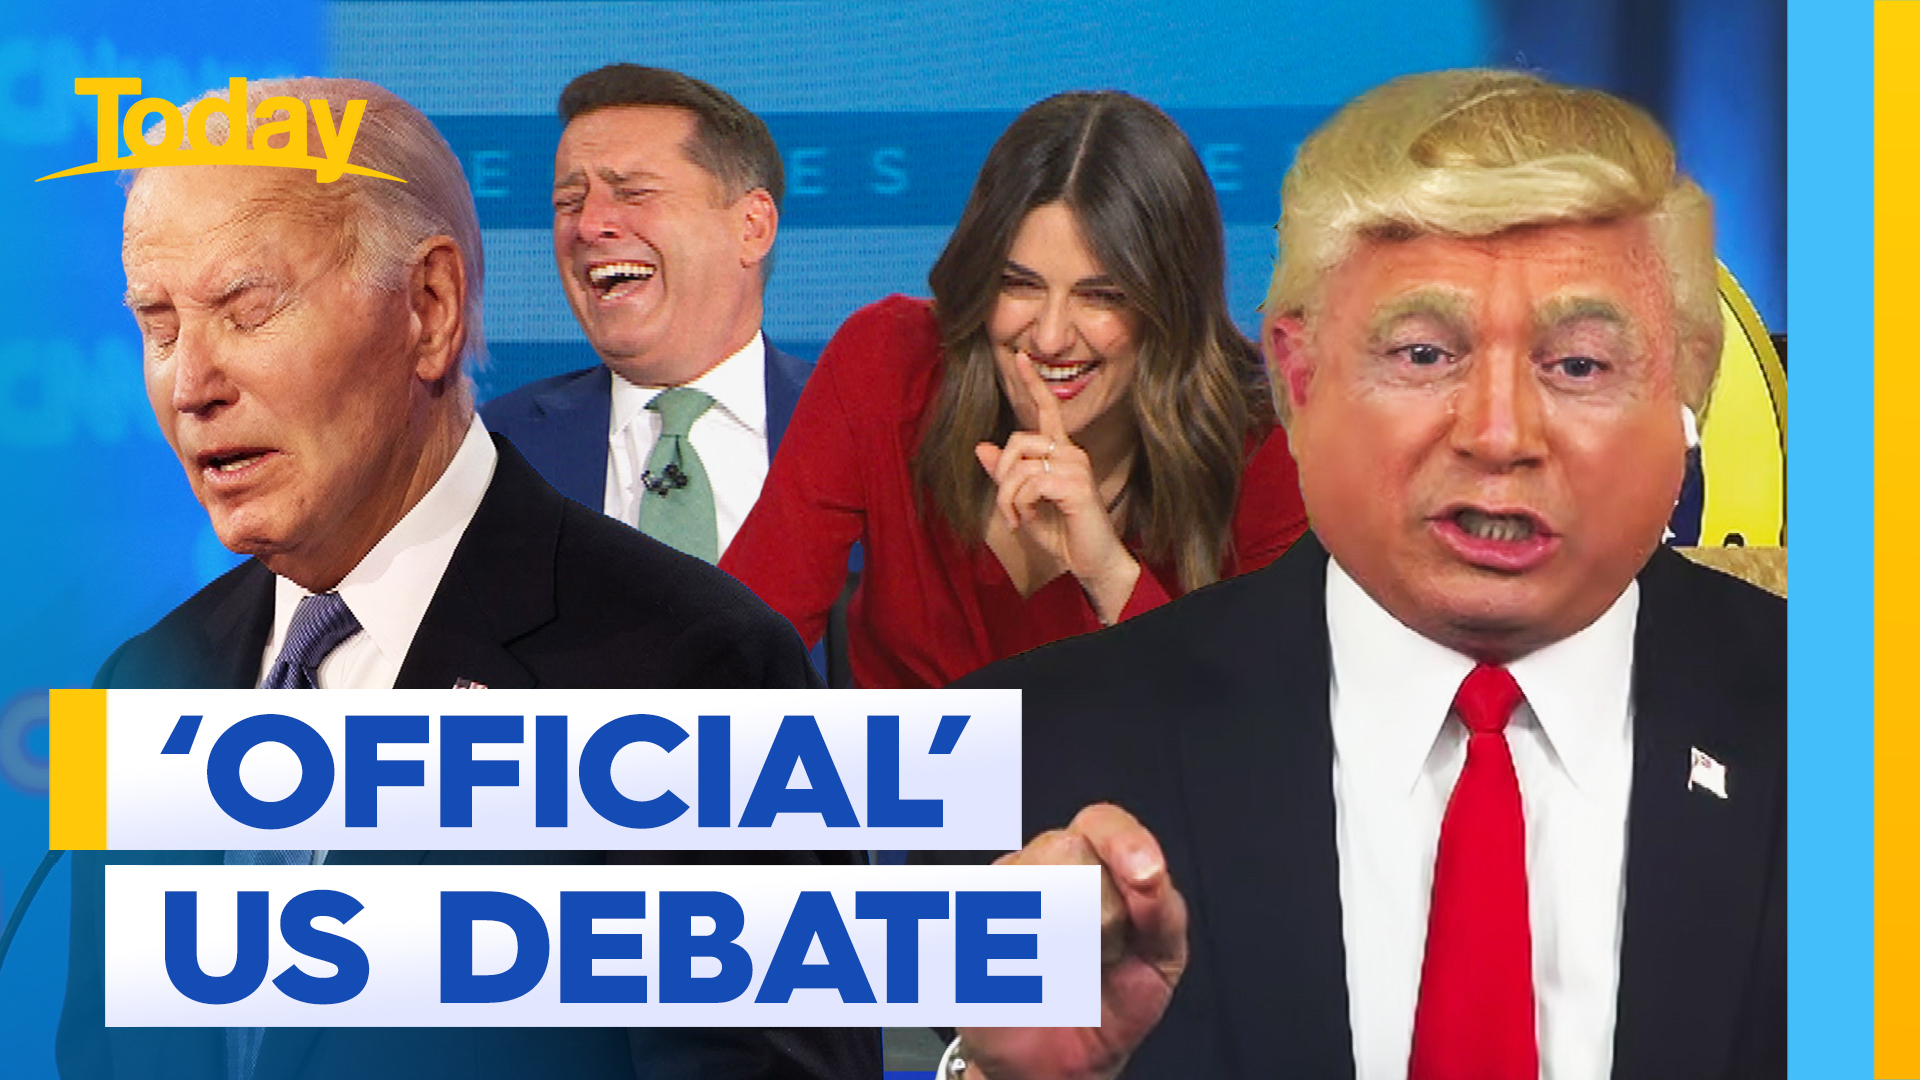 Today hosts 'very official' US Presidential debate round two